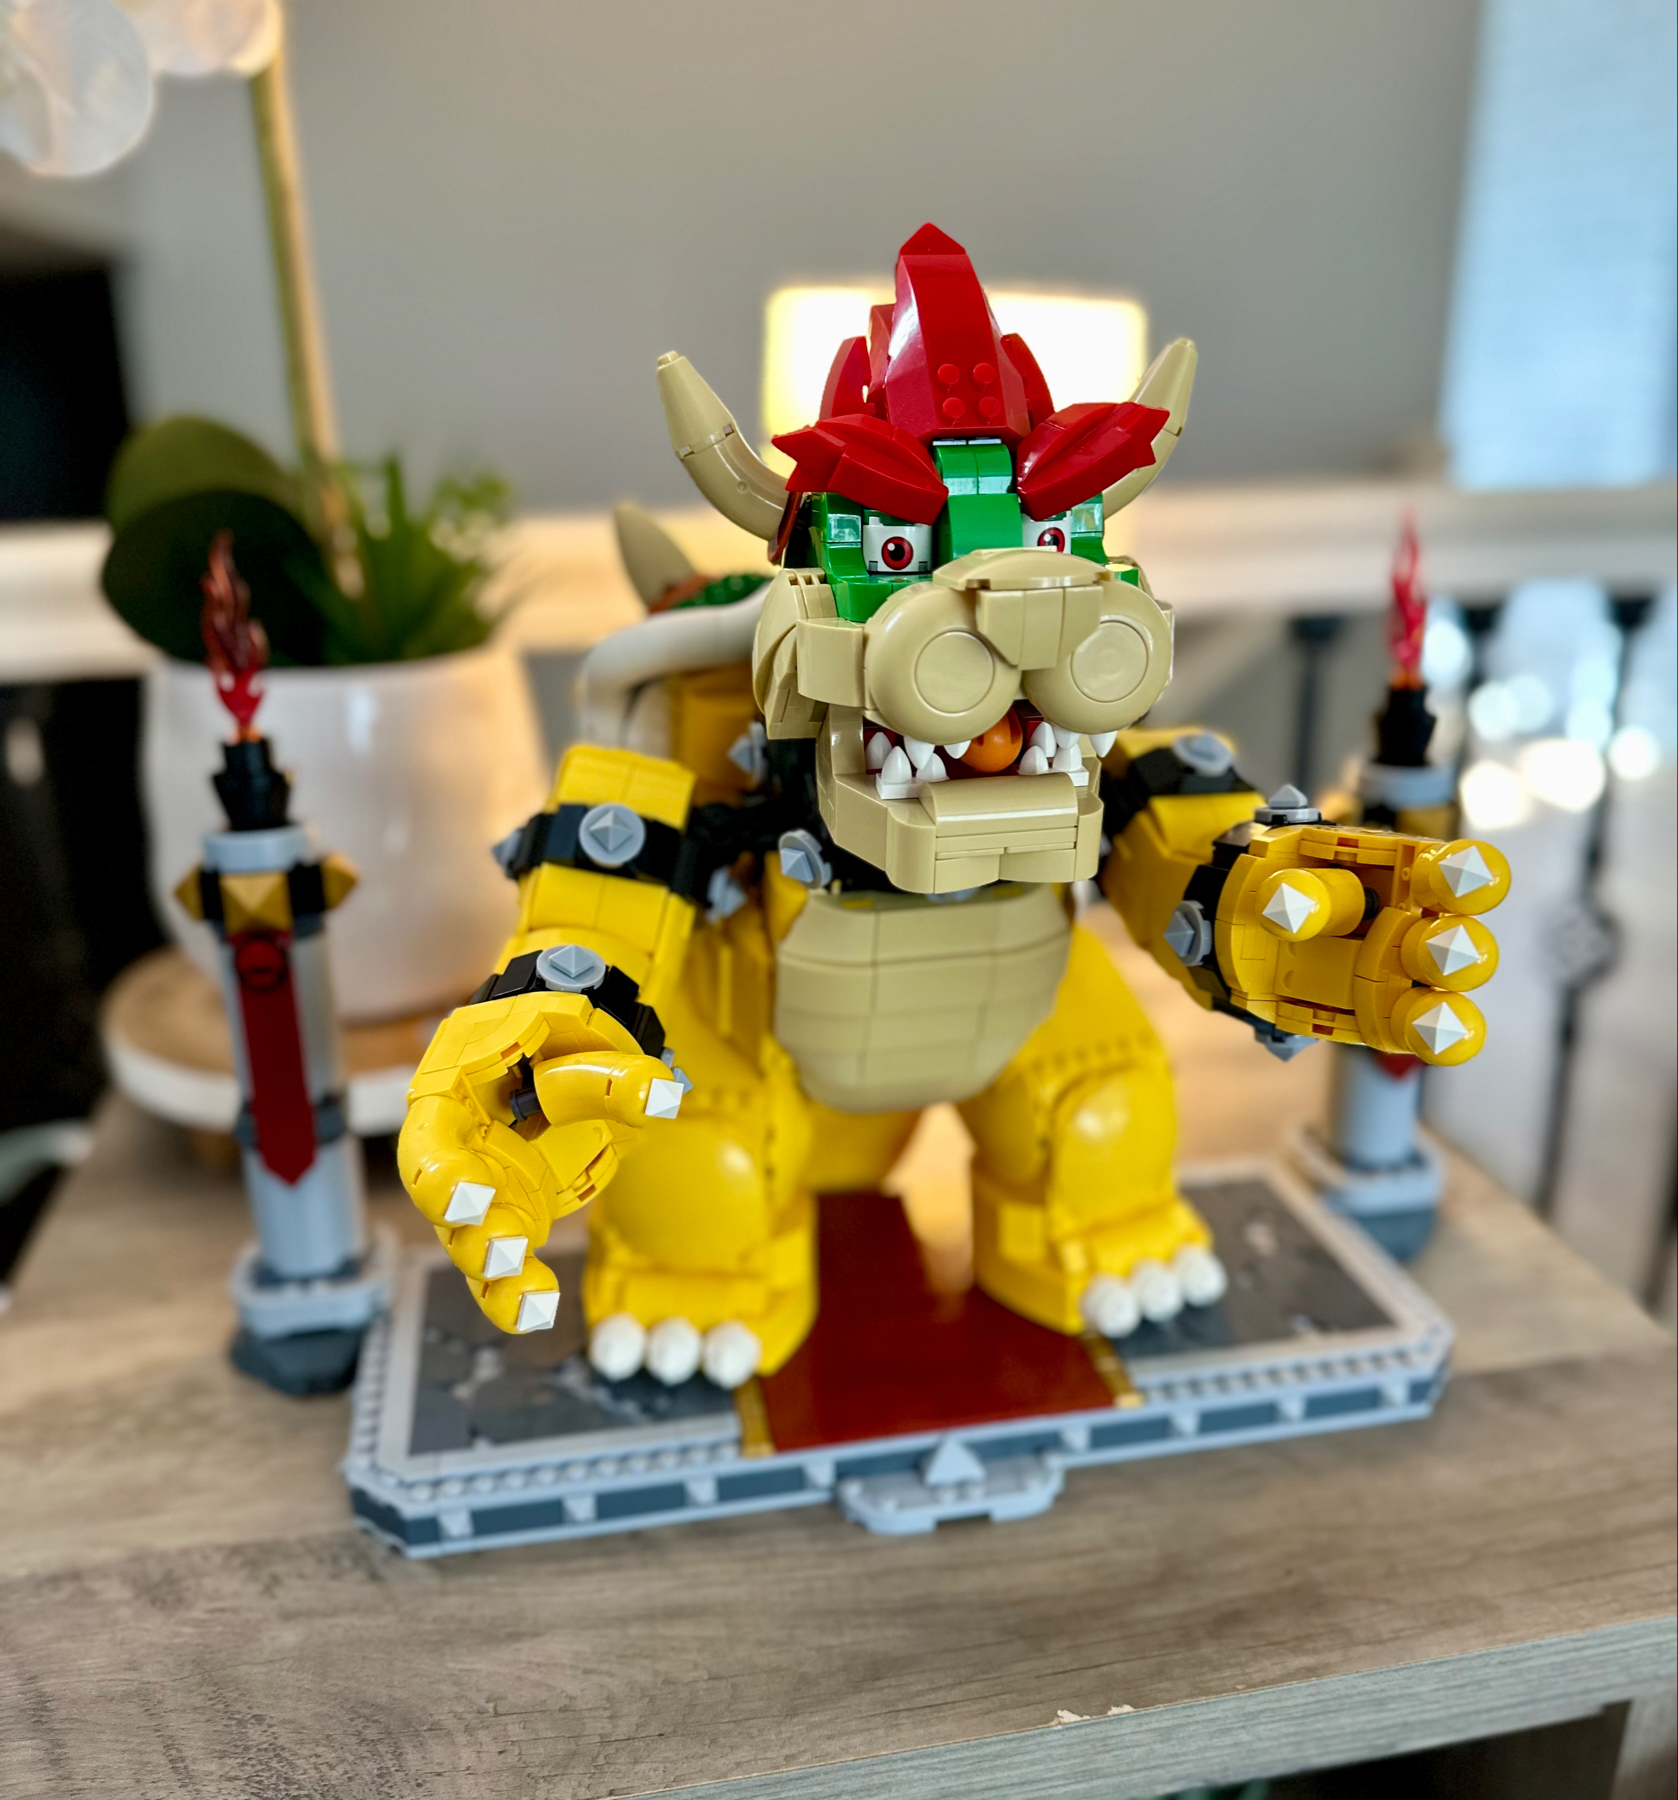 A LEGO model of a yellow and red dragon standing on a gray base, featuring green eyes, large claws, and an open mouth displaying white teeth. The backdrop includes a furnished room with indoor plants and a lamp.